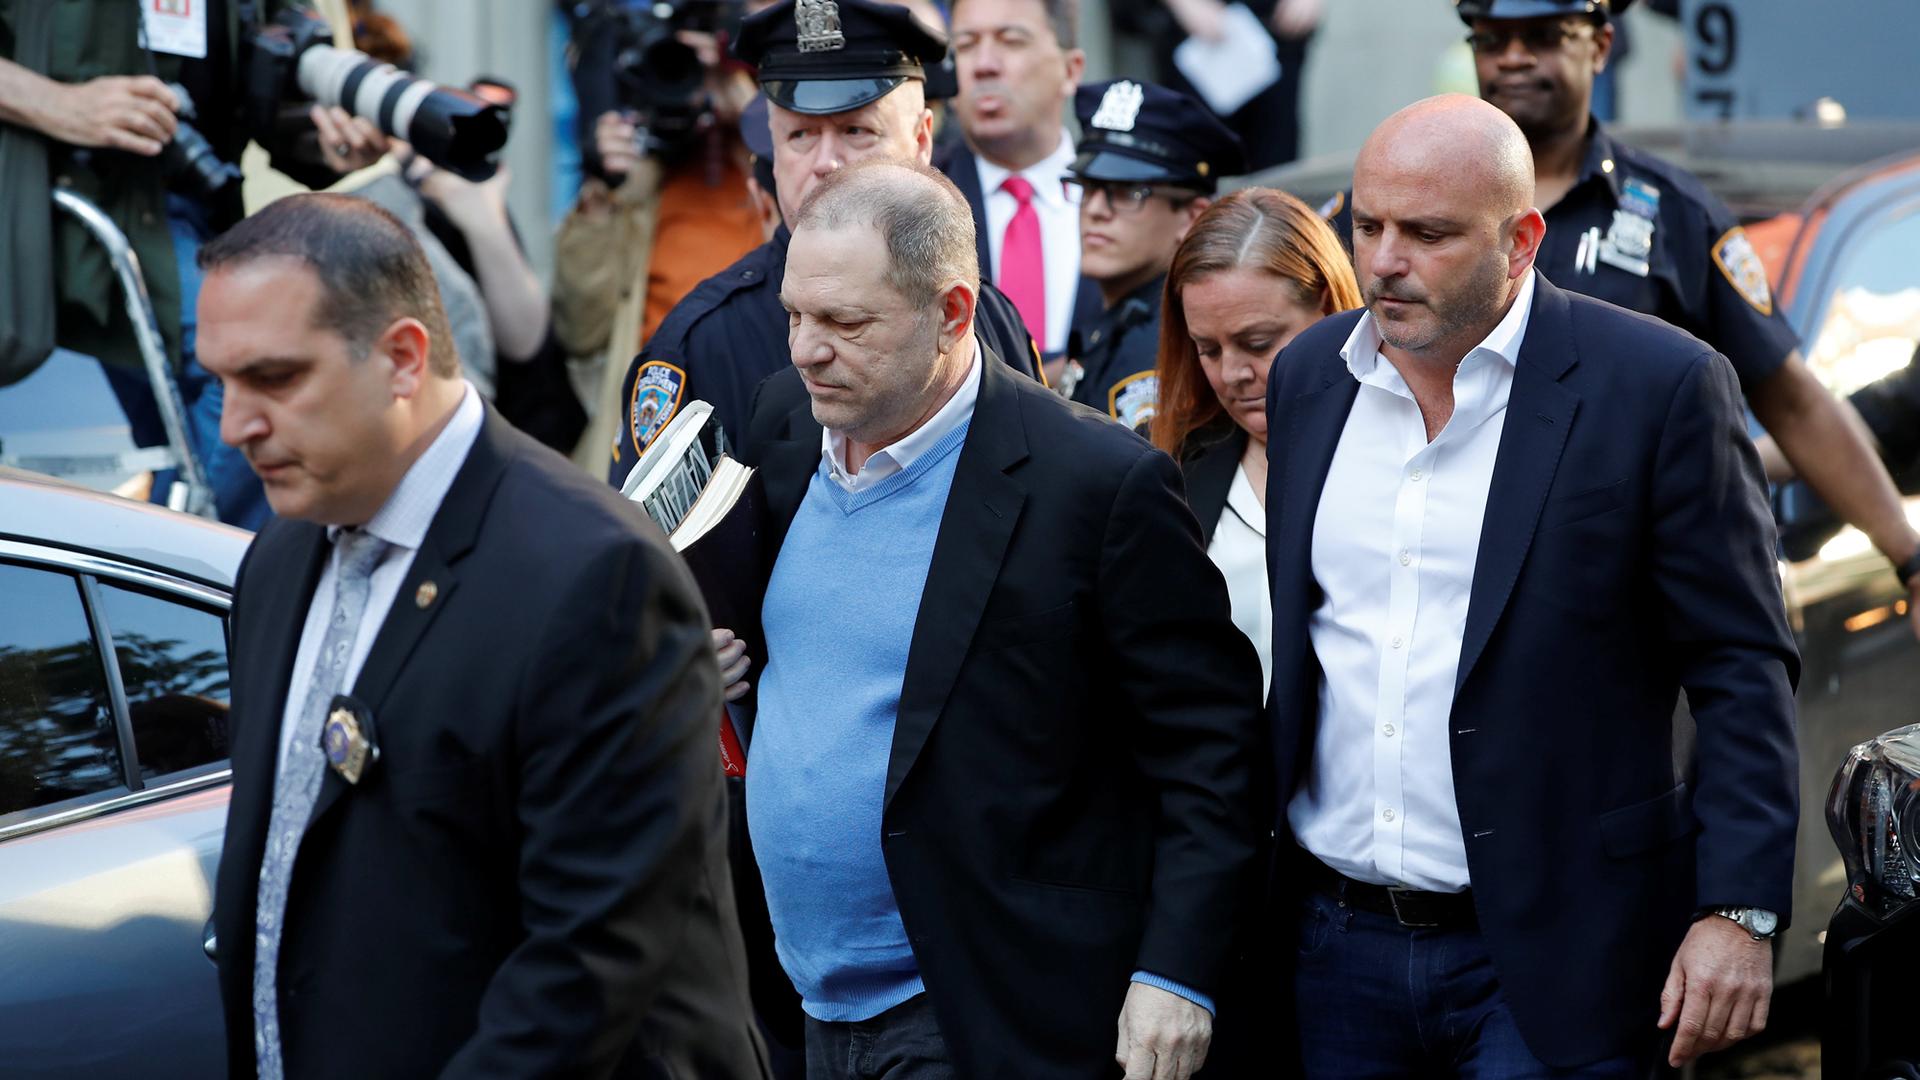 Film producer Harvey Weinstein, surrounded by NYC authorities, arrives at the 1st Precinct in Manhattan.